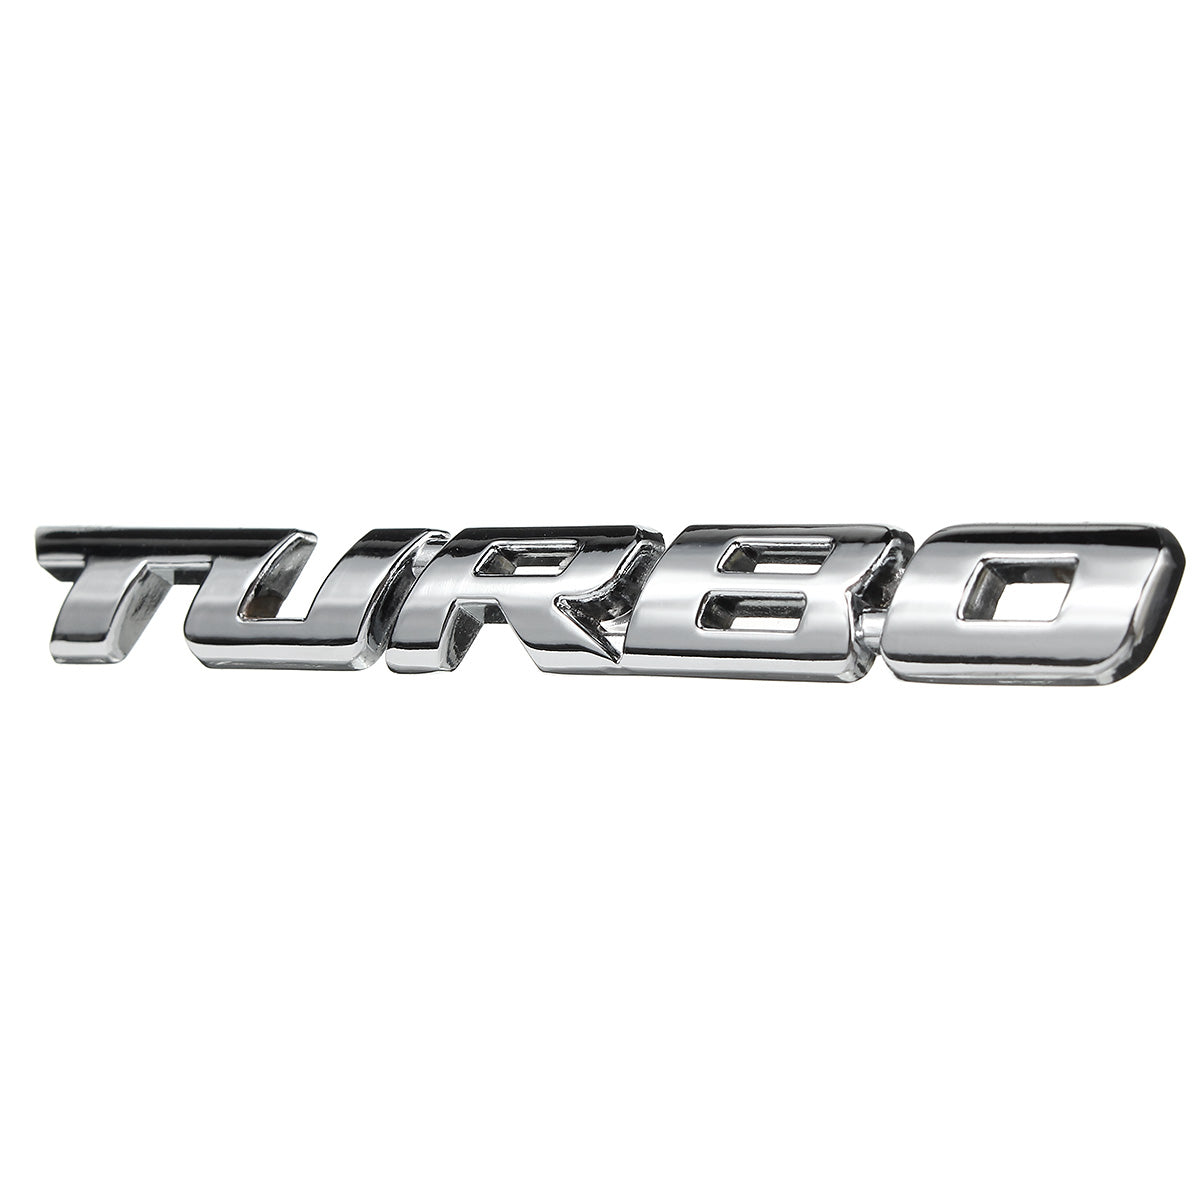 White Smoke Turbo 3D Metal Car Decals Lettering Badge Sticker for Auto Body Rear Tailgate